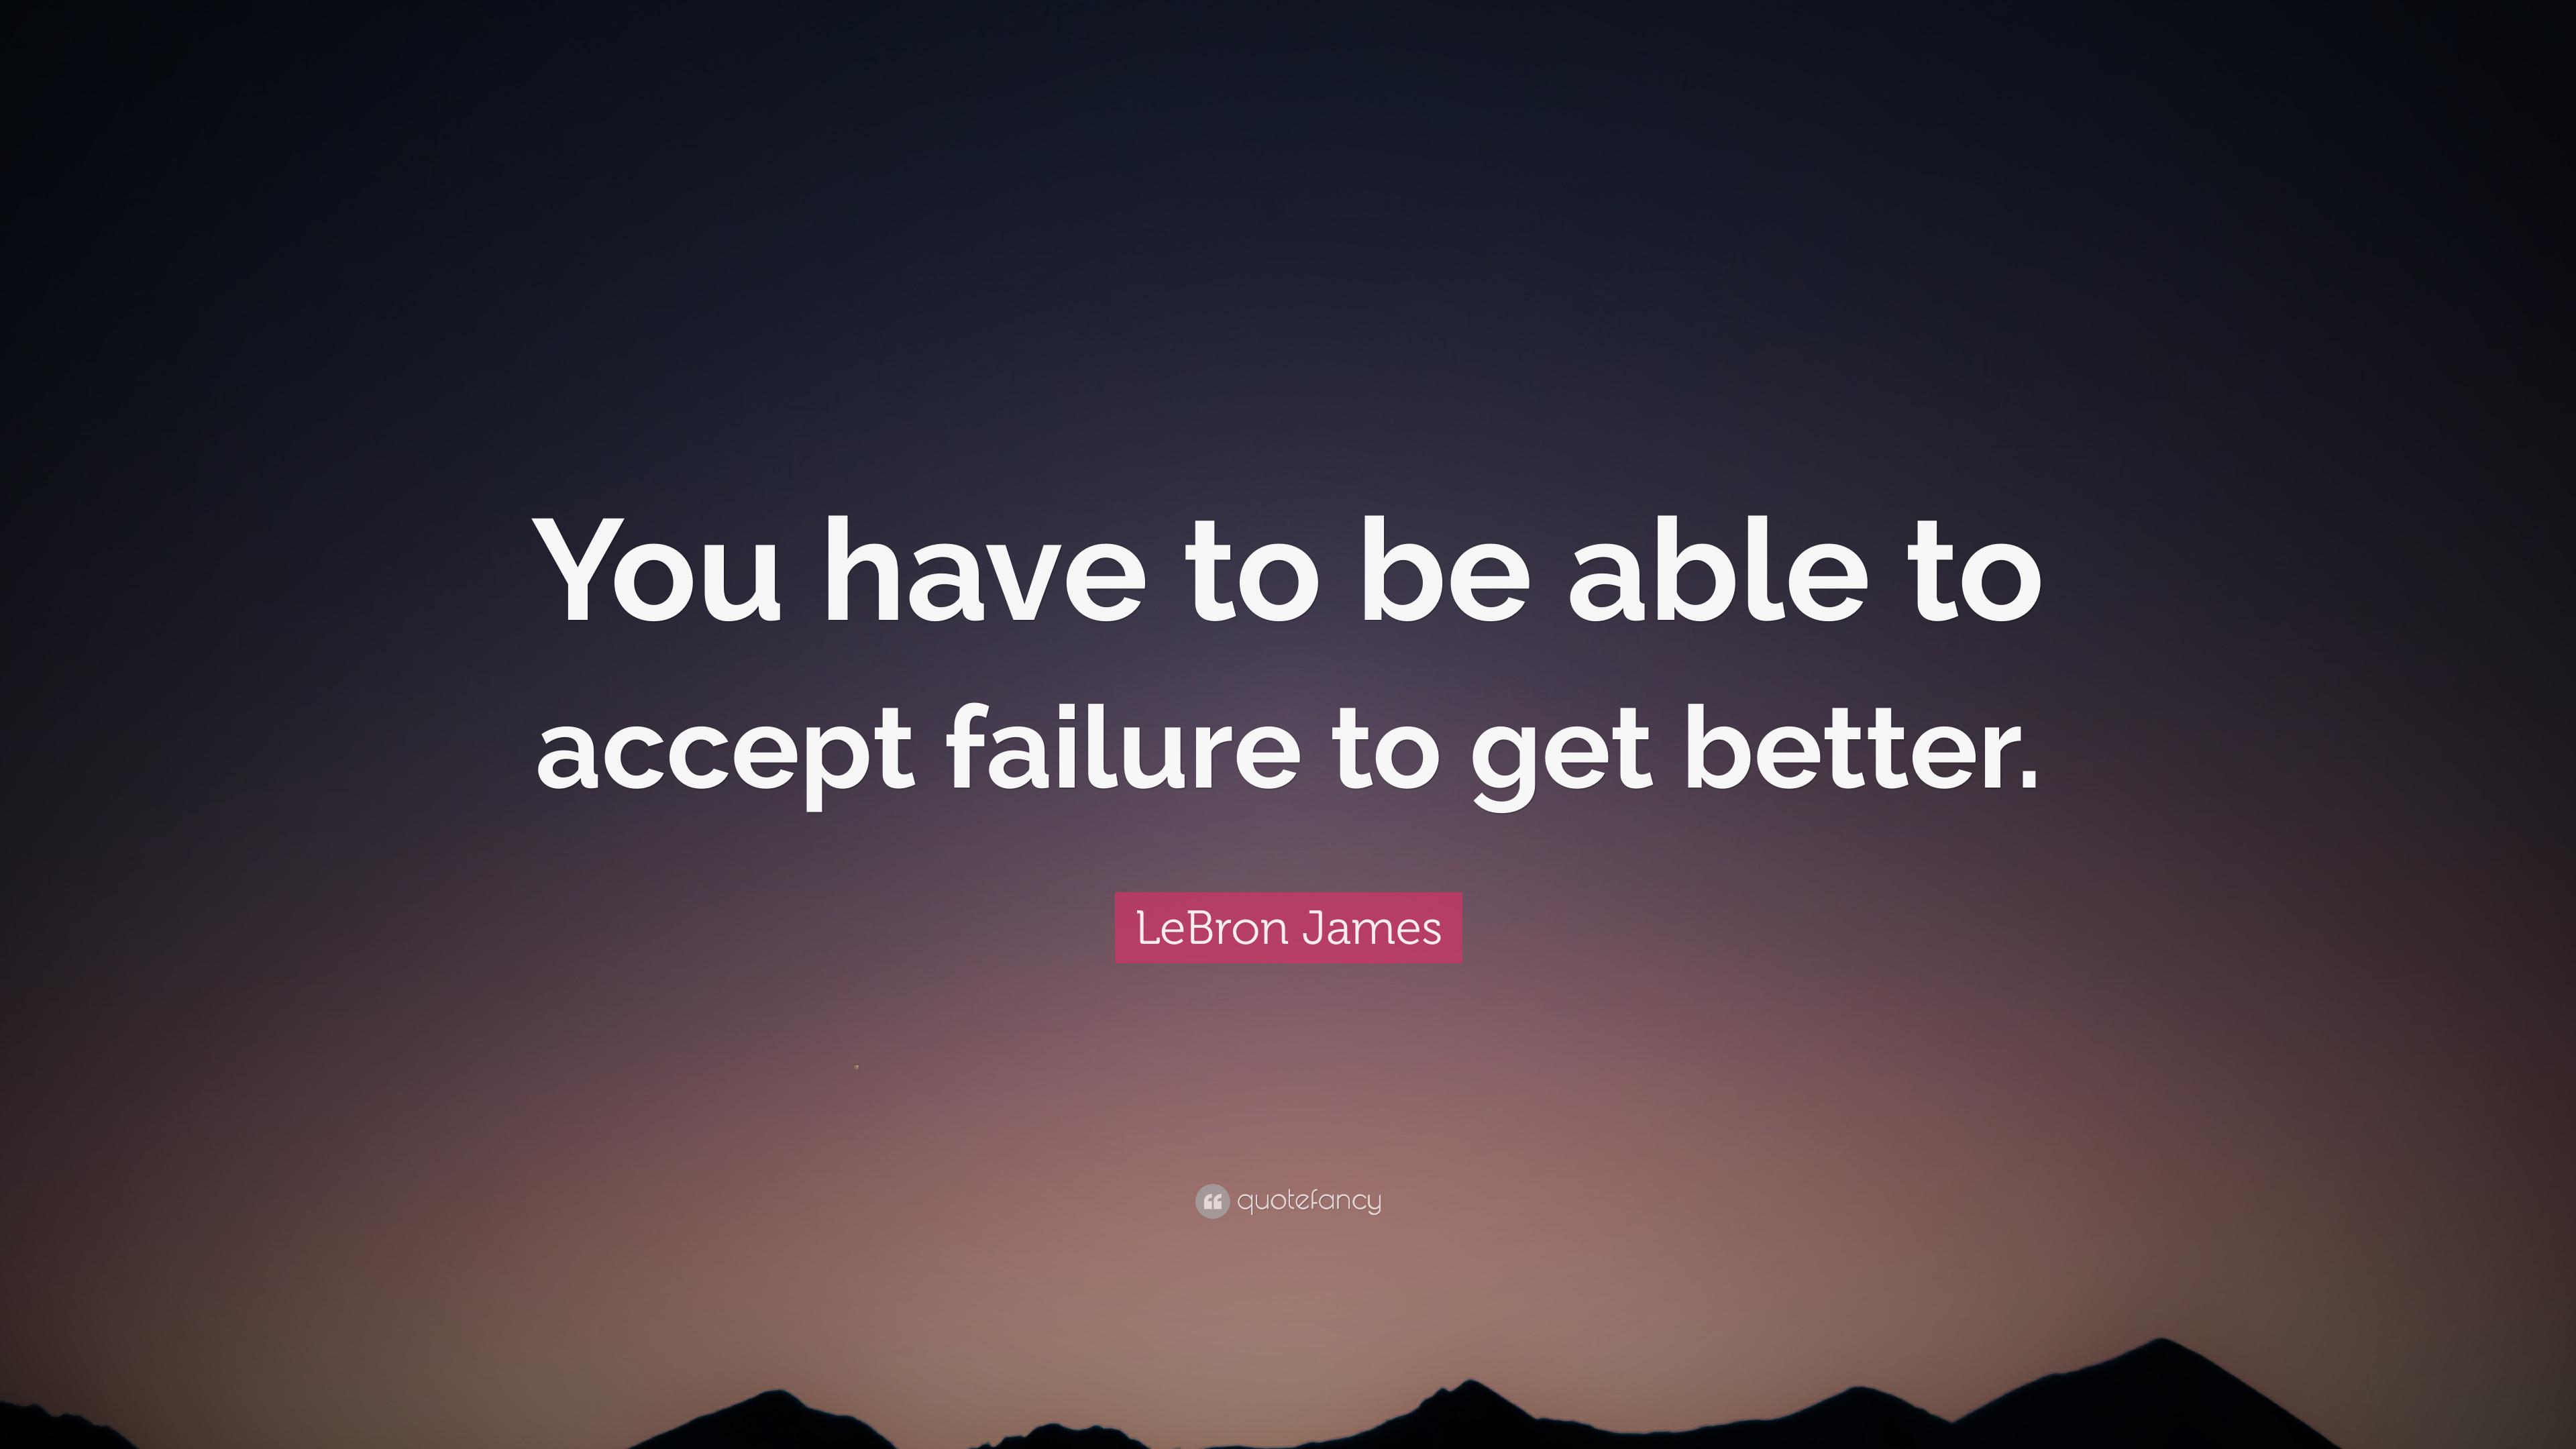 LeBron James Quote: “You have to be able to accept failure